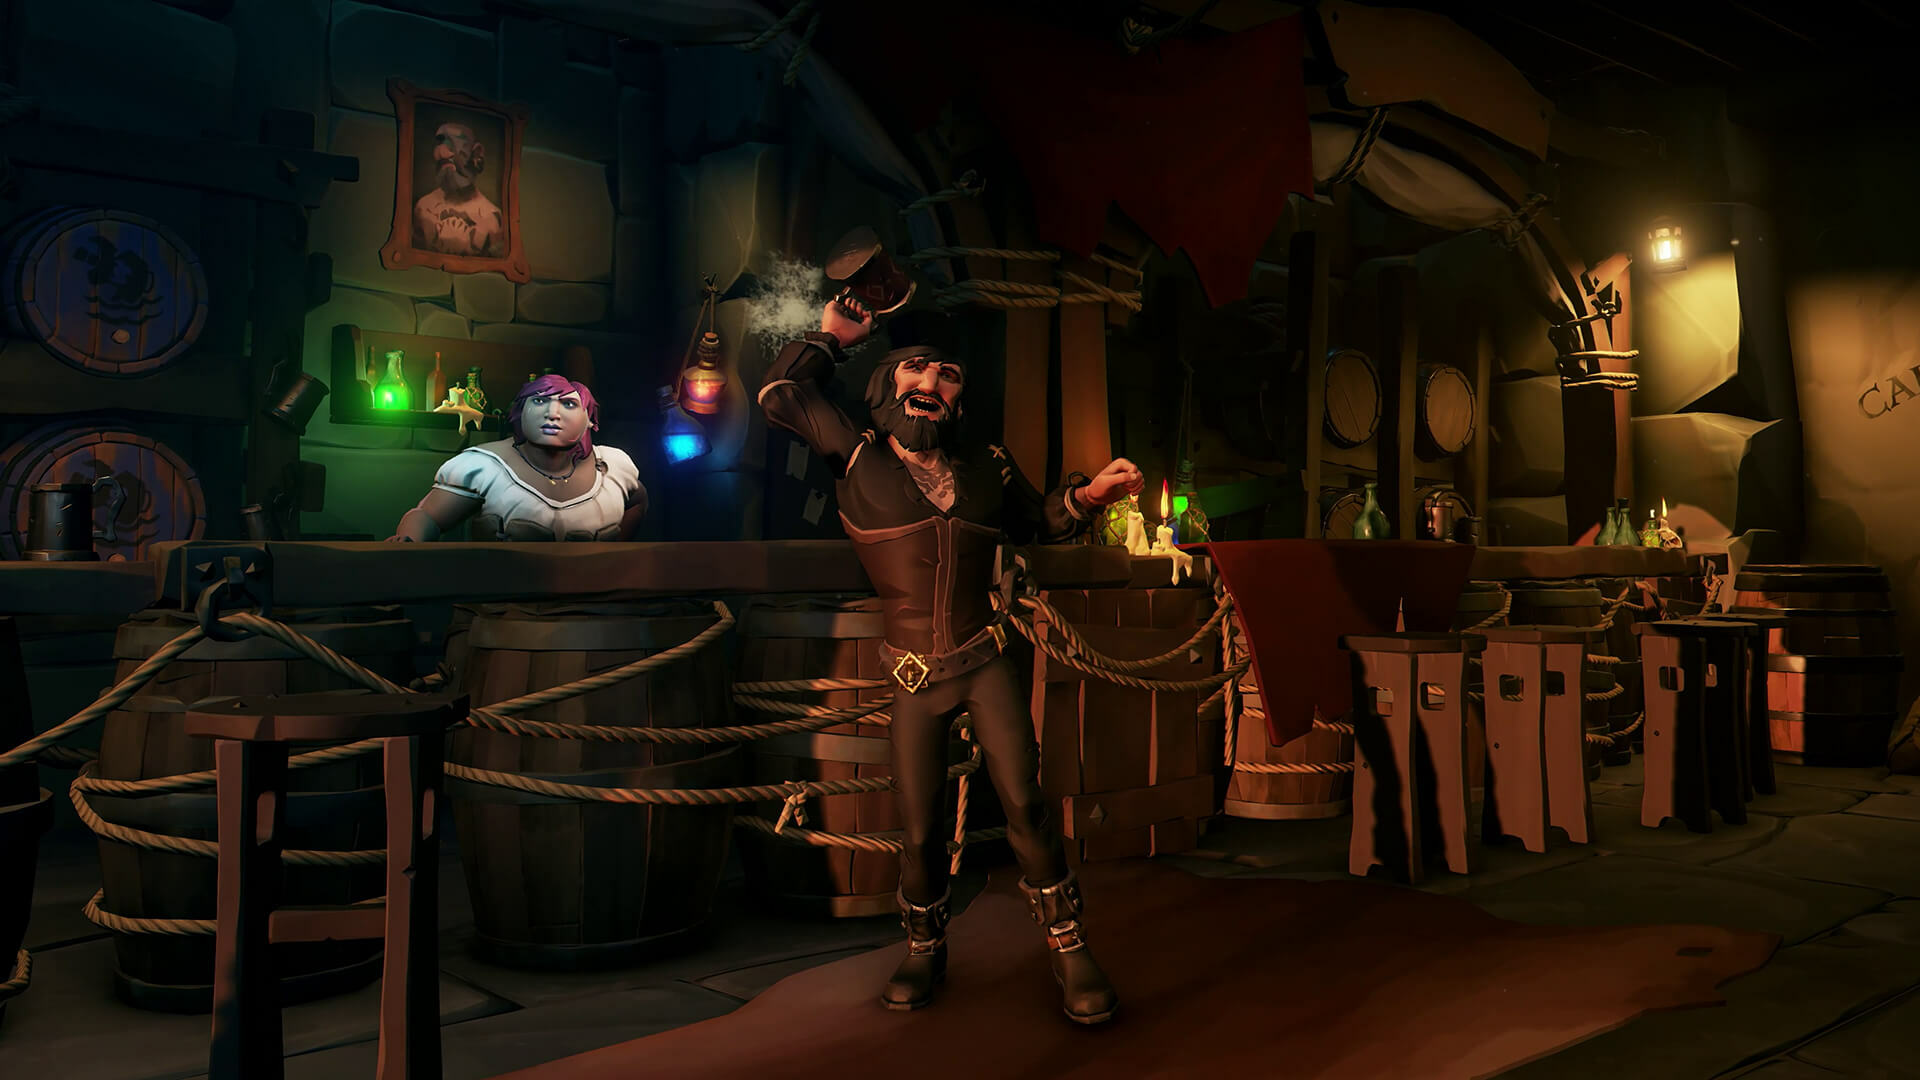 Sea of Thieves will introduce PvP-free servers, 24-player guilds